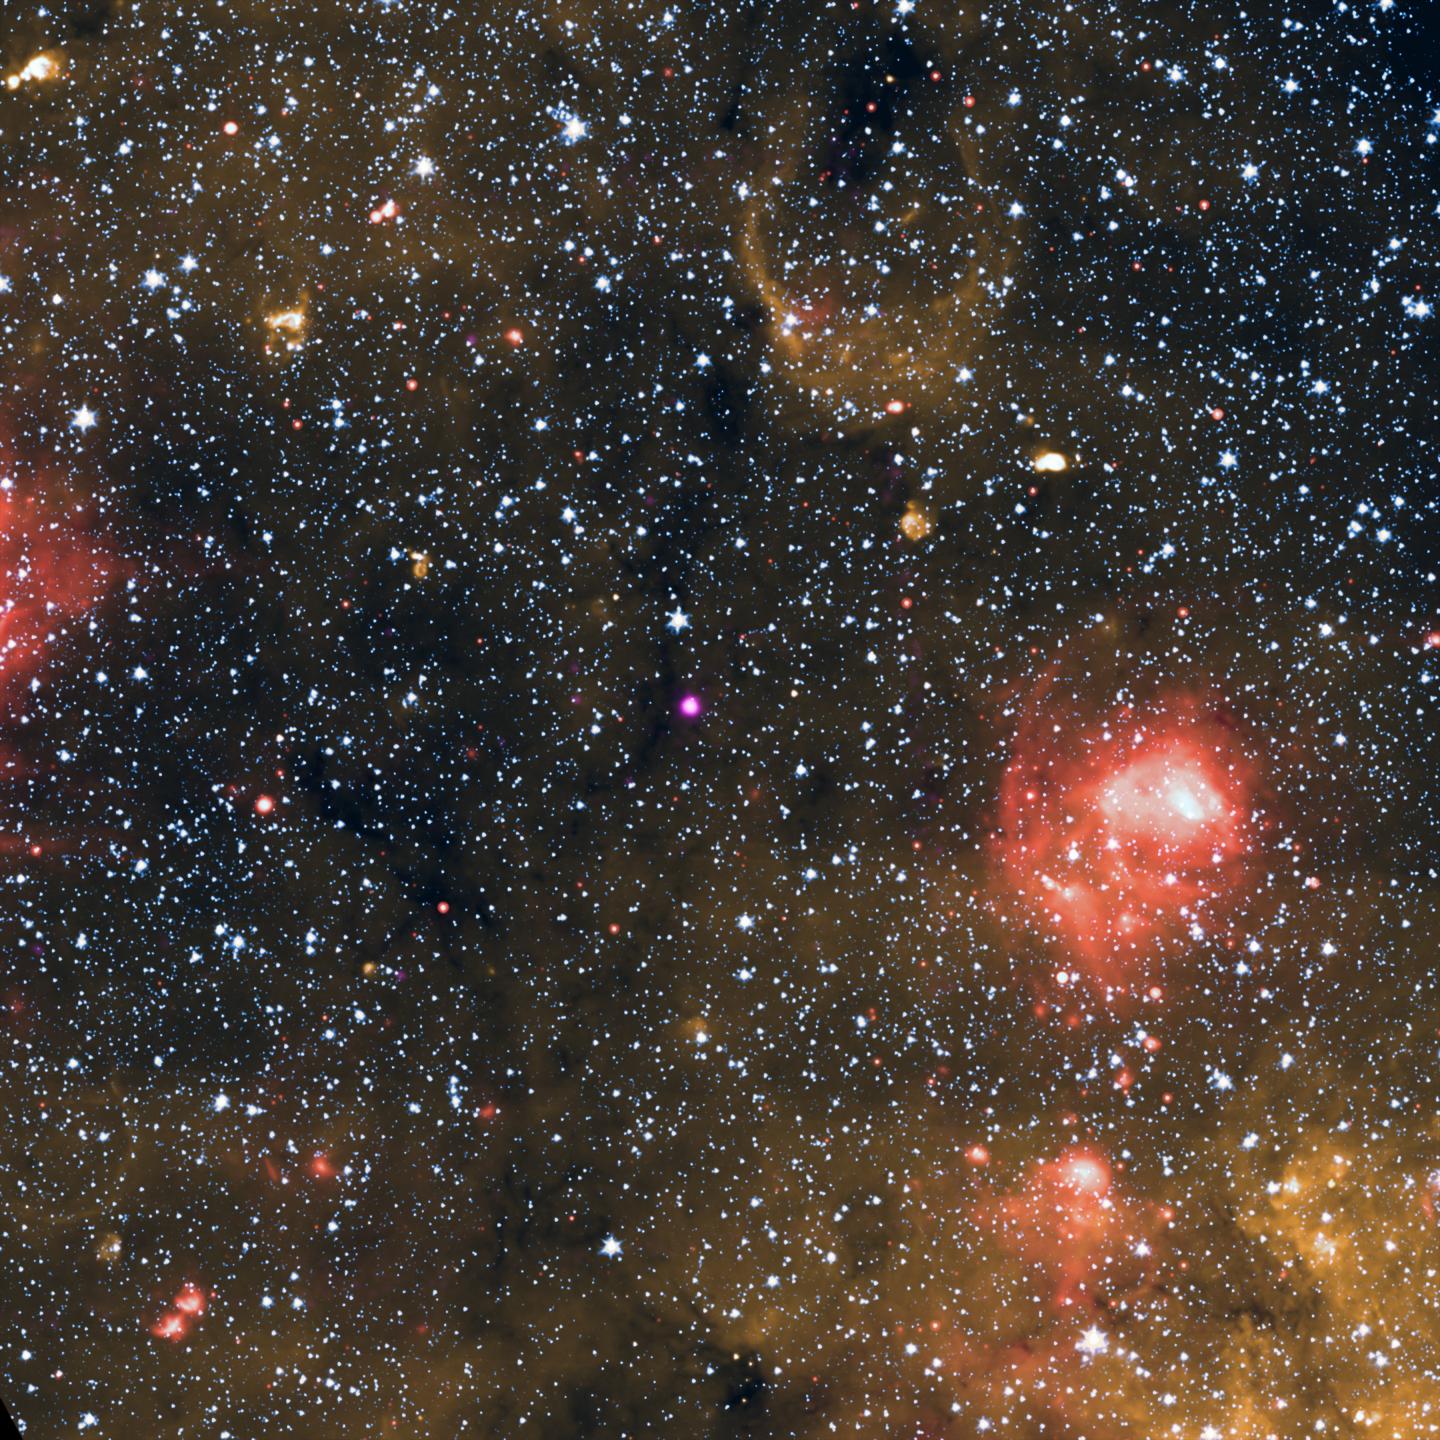 X-ray and Infrared Image of J1818